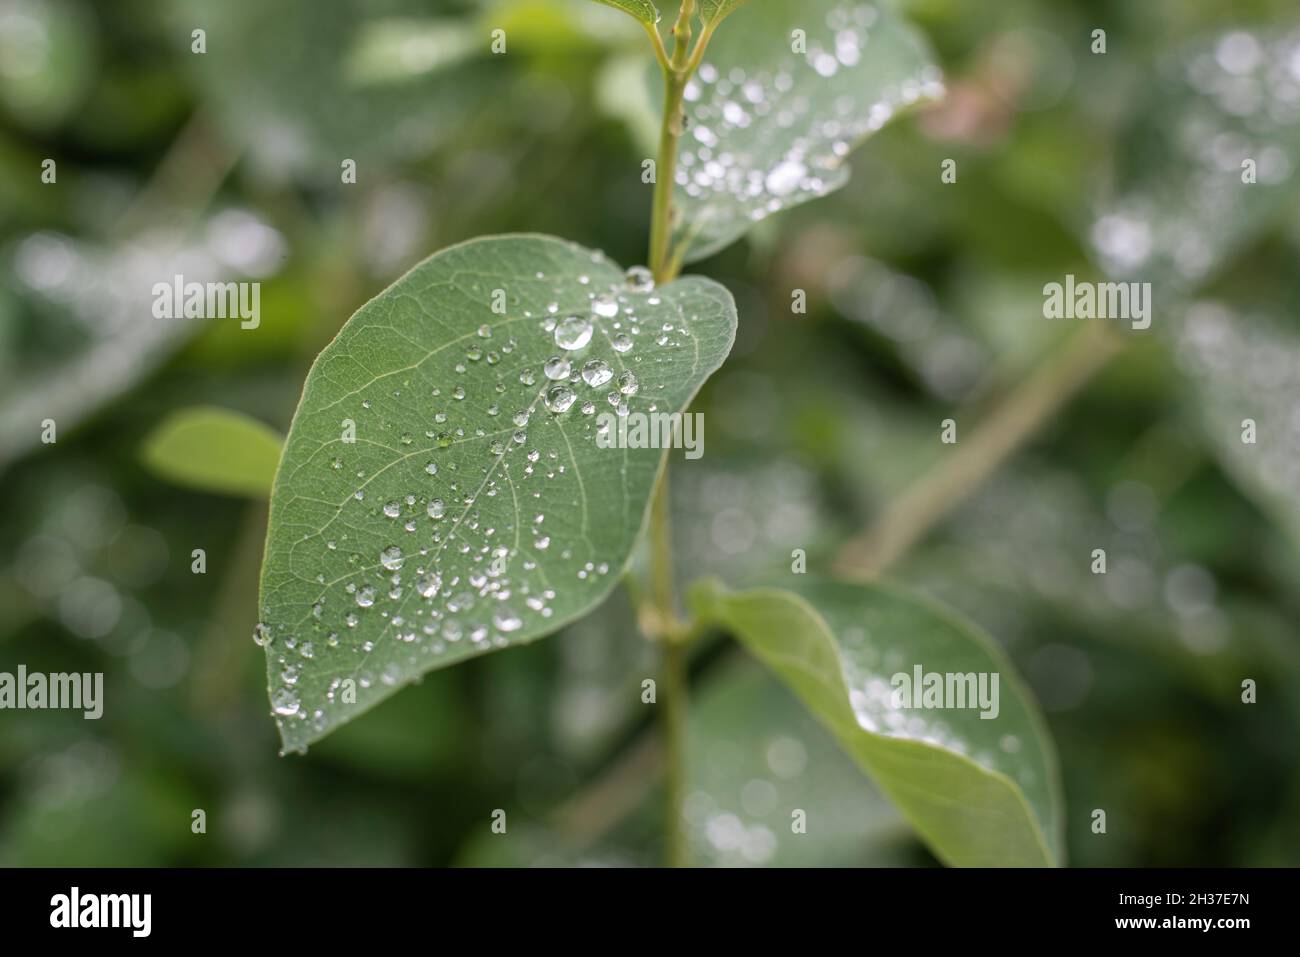 close-up of the leaf of a snowberry shrub with shimmering rain drops Stock Photo